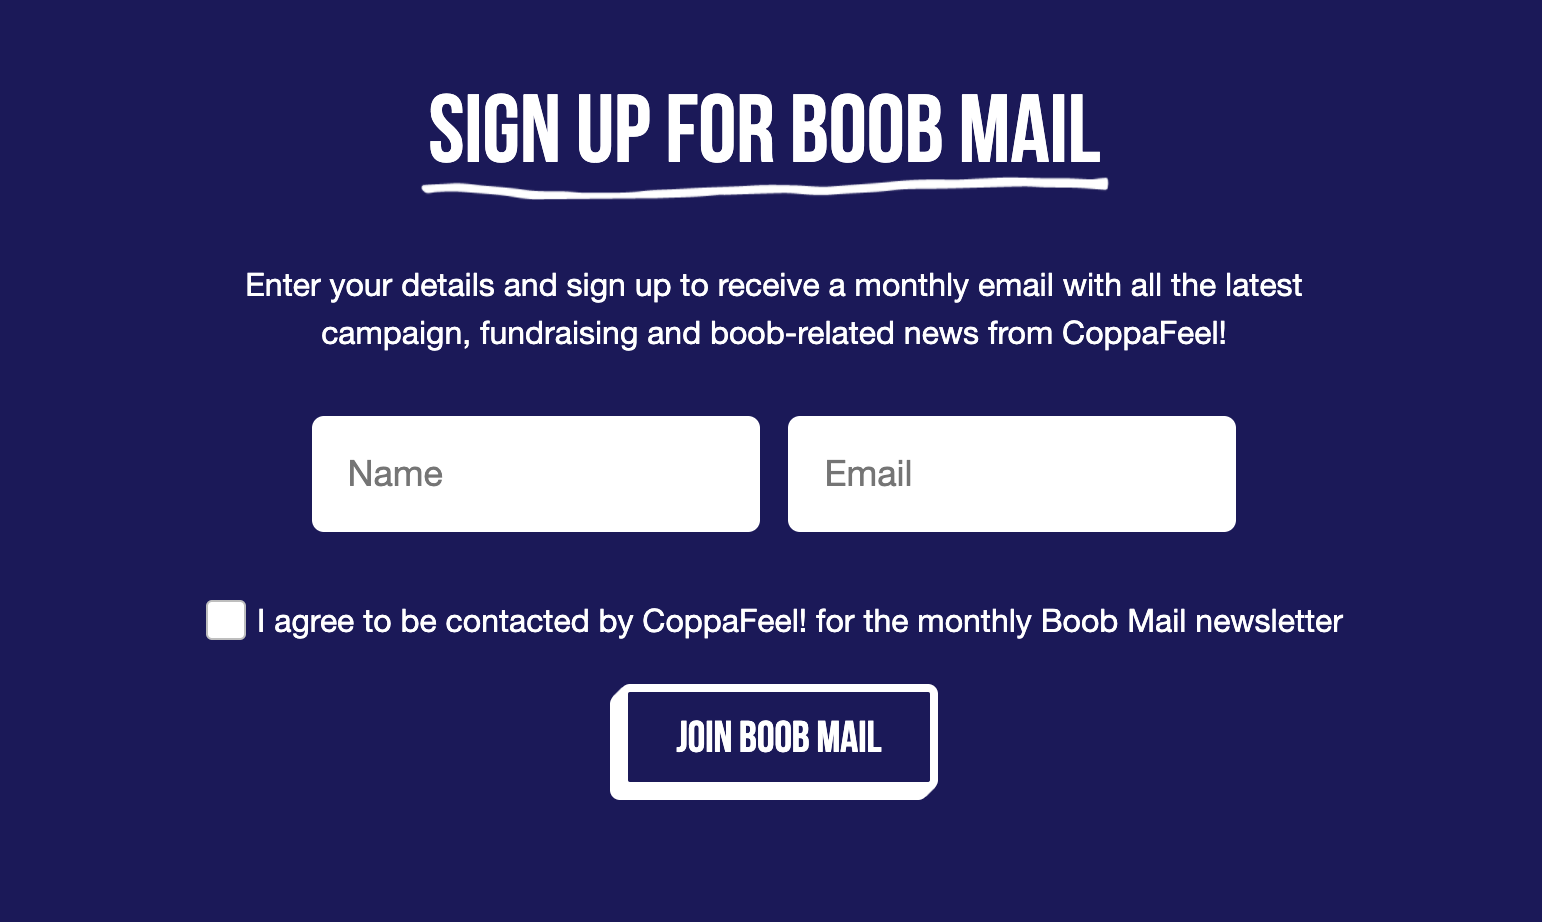 a screenshot of CoppaFeel's website. Text reads: Sign up for boob mail. Enter your details and sign up to receive a monthly email with all the latest campaign, fundraising and boob-related news from CoppaFeel! Name. Email. I agree to be contacted by CoppaFeel for the monthly Boob Mail newsletter. Join Boob Mail.